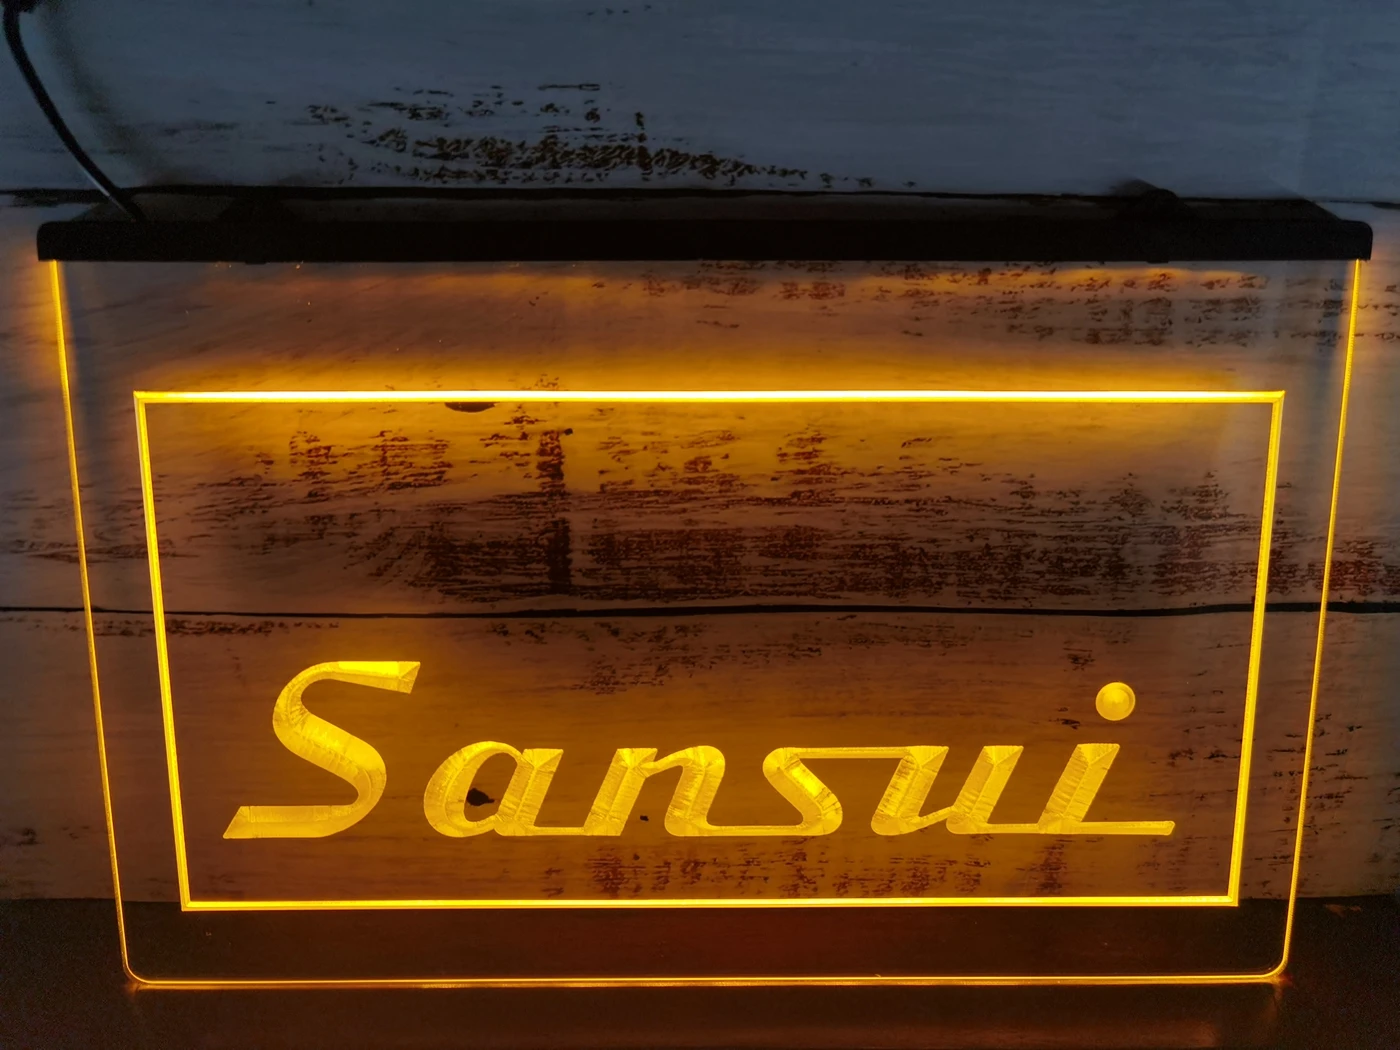 Sansui LED Neon Light Sign Display Decor Signboard Home Theater Audio System NEW 